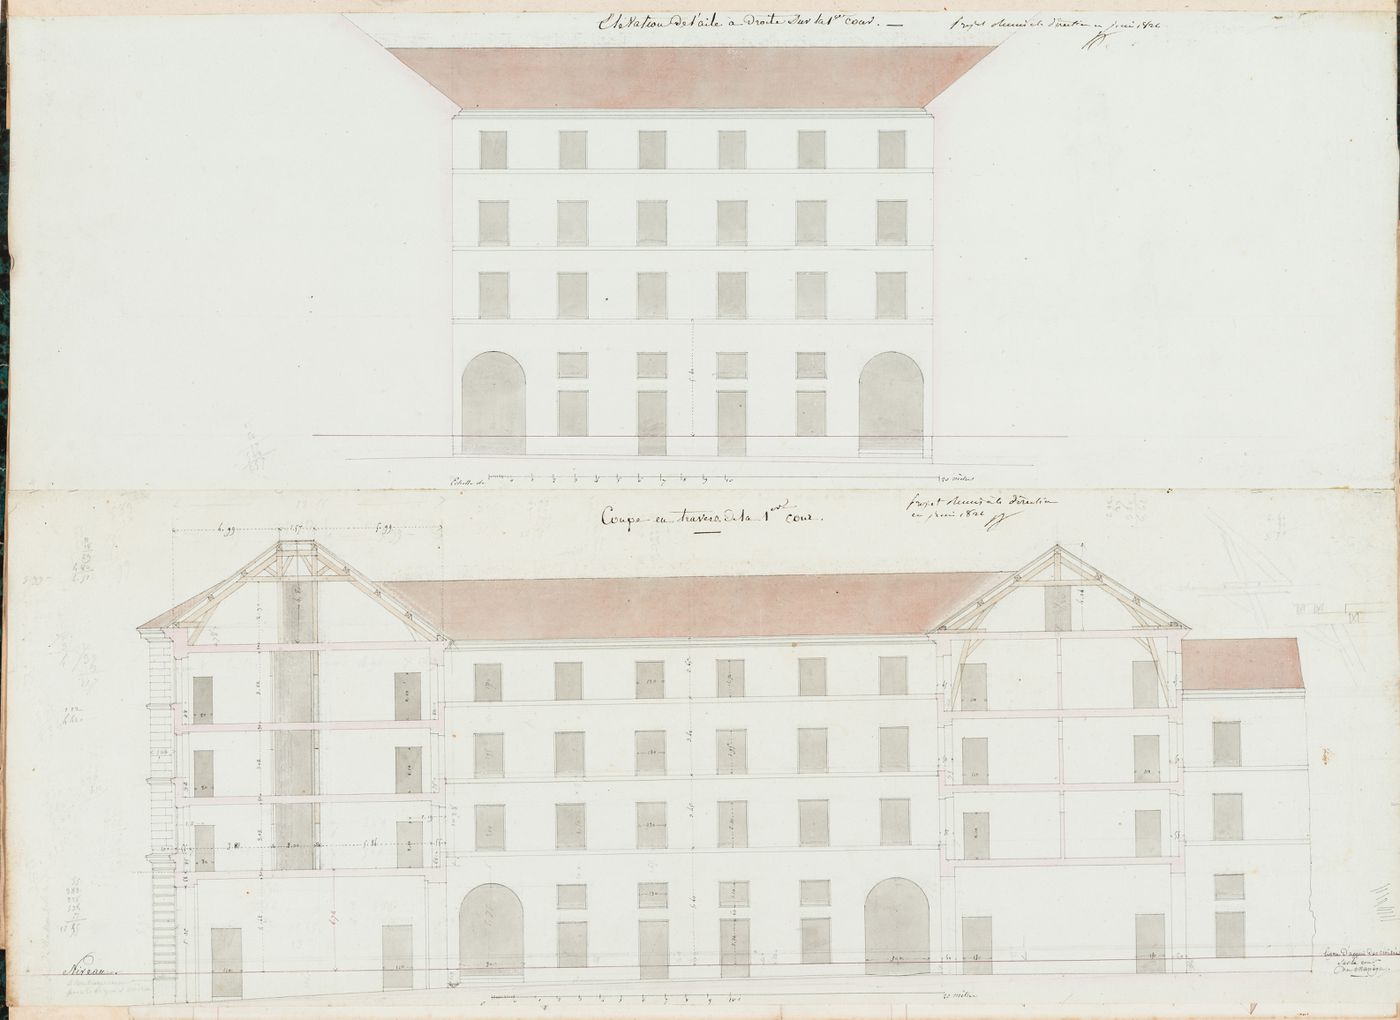 Project for the caserne de la Gendarmerie royale, rue Mouffetard: Elevation for the right wing facing the first courtyard